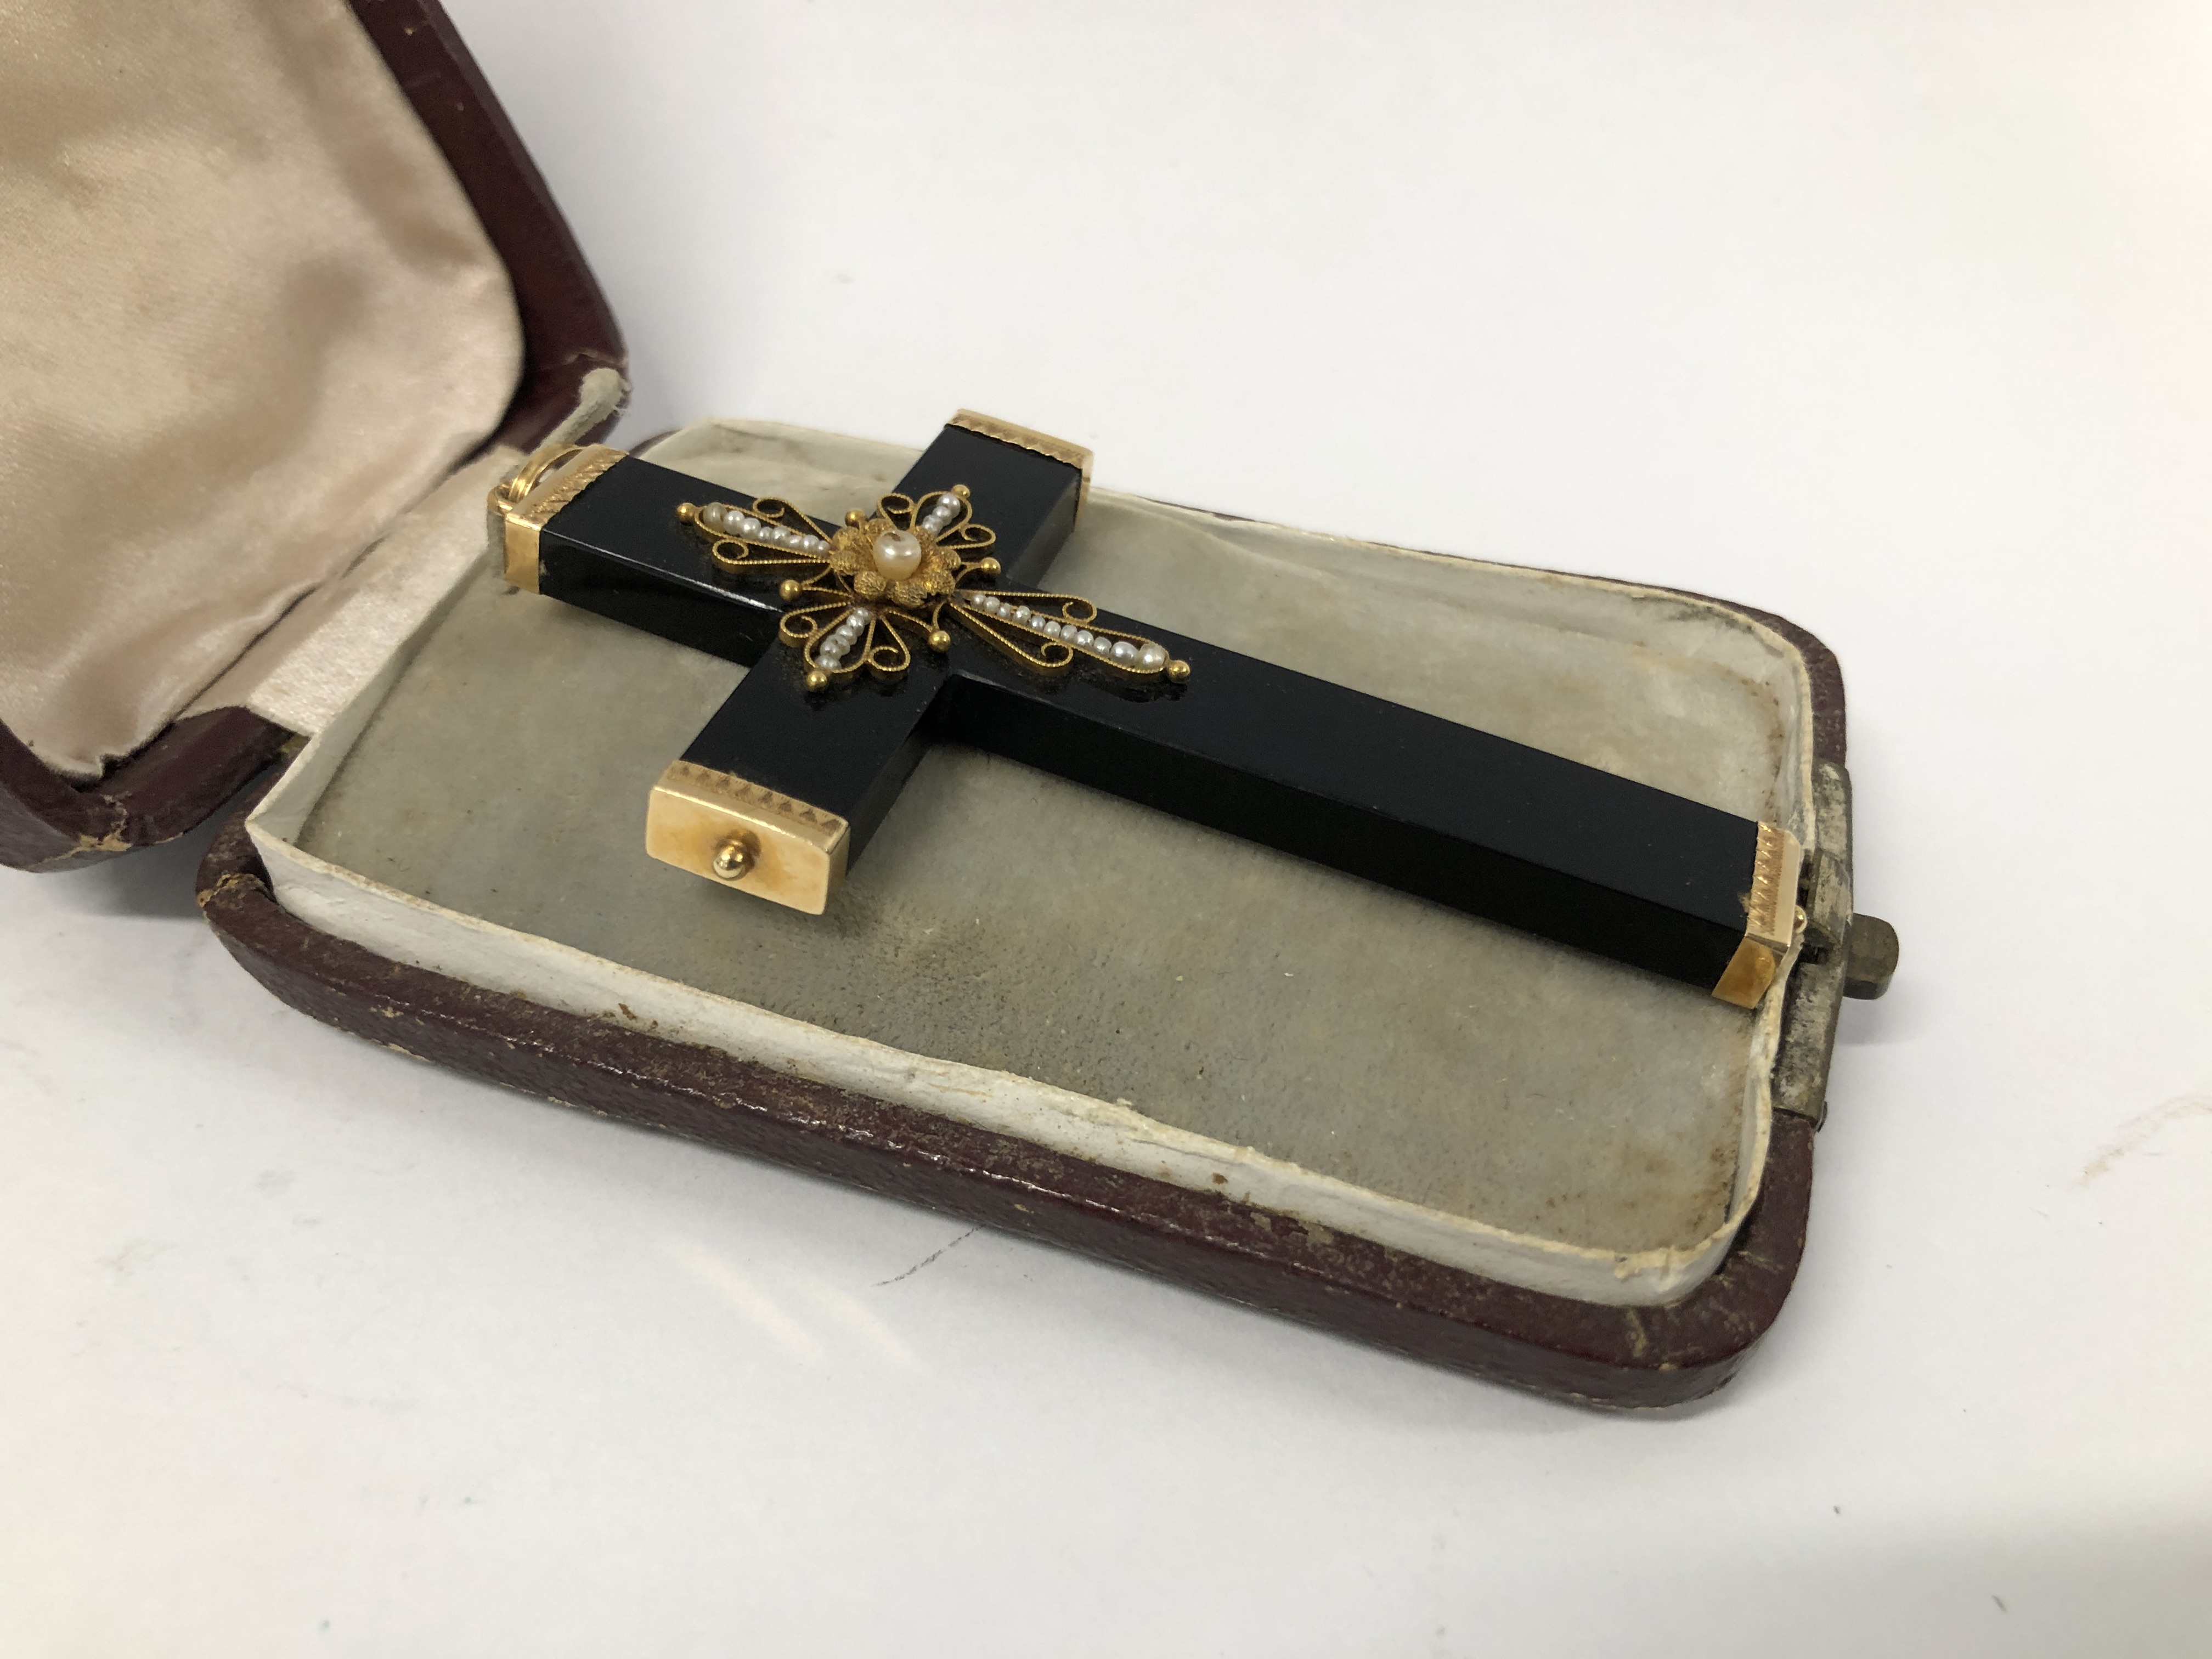 ANTIQUE MOURNING CROSS SET WITH SEED YELLOW METAL CAPPING AND DECORATION IN A VINTAGE BOX - Image 3 of 6